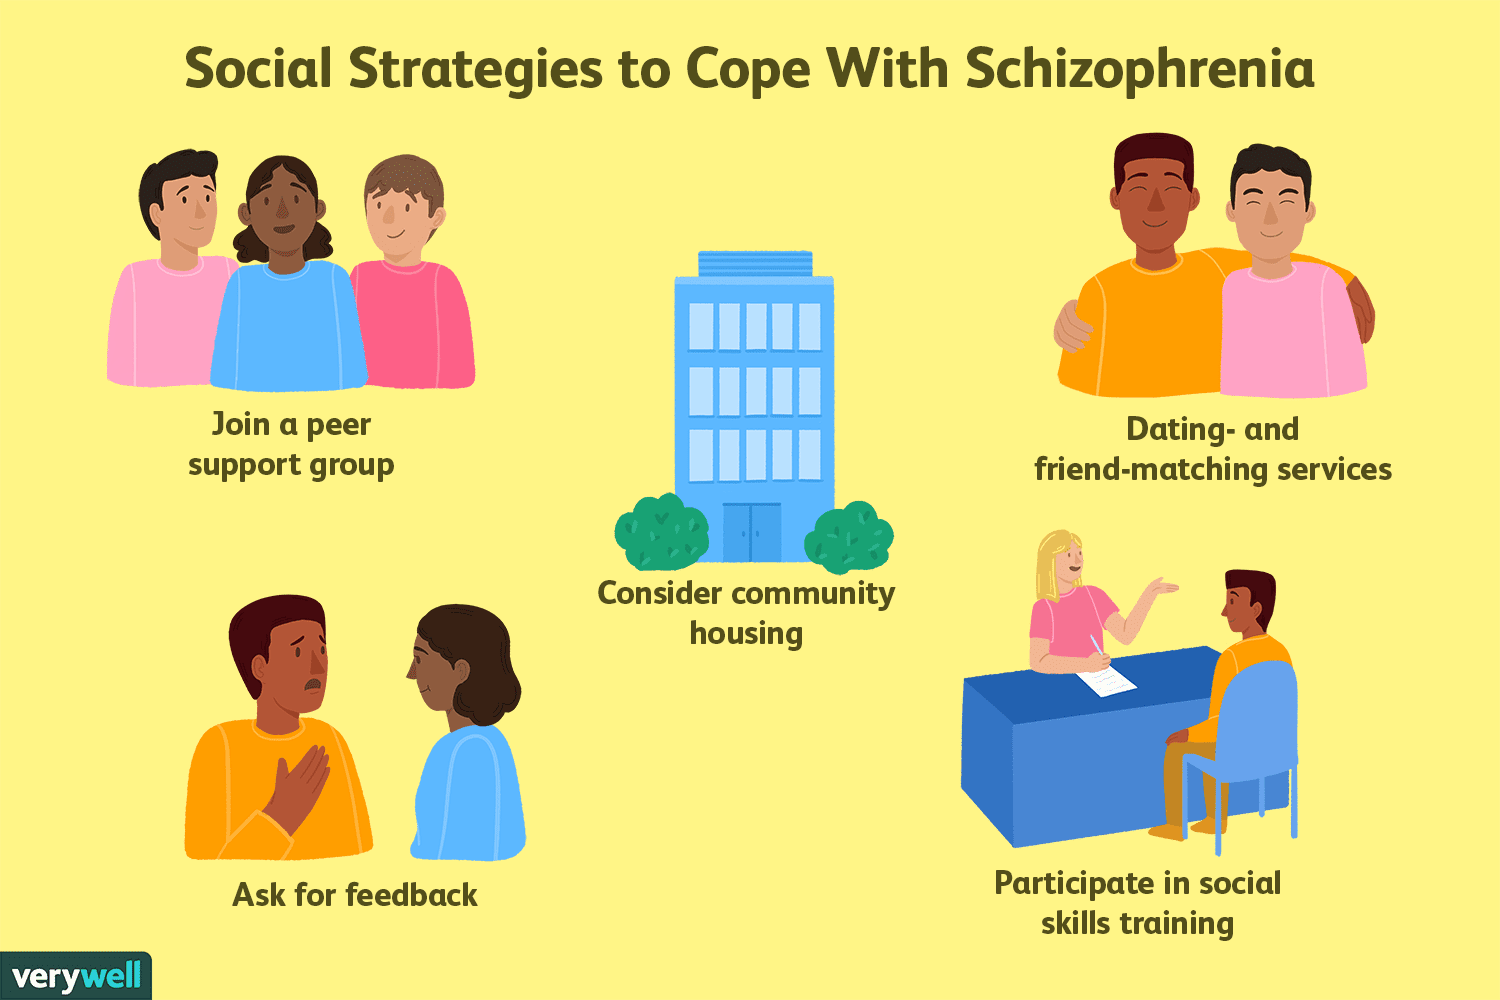 Schizophrenia: Coping, Supporting, and Living Well